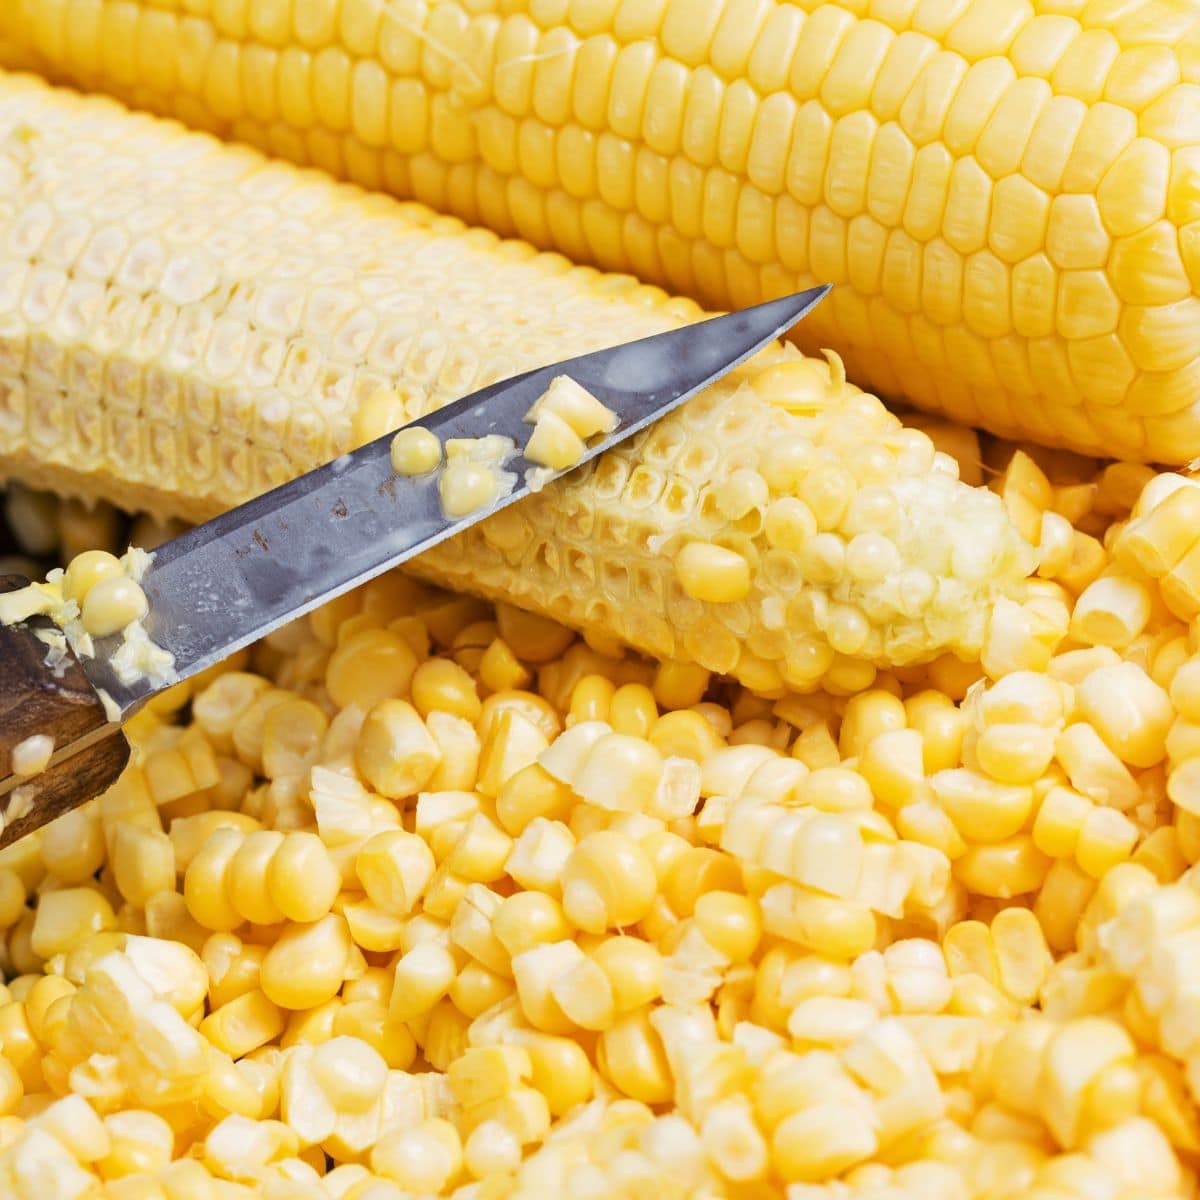 Using a sharp knife to remove corn kernels from the cob.